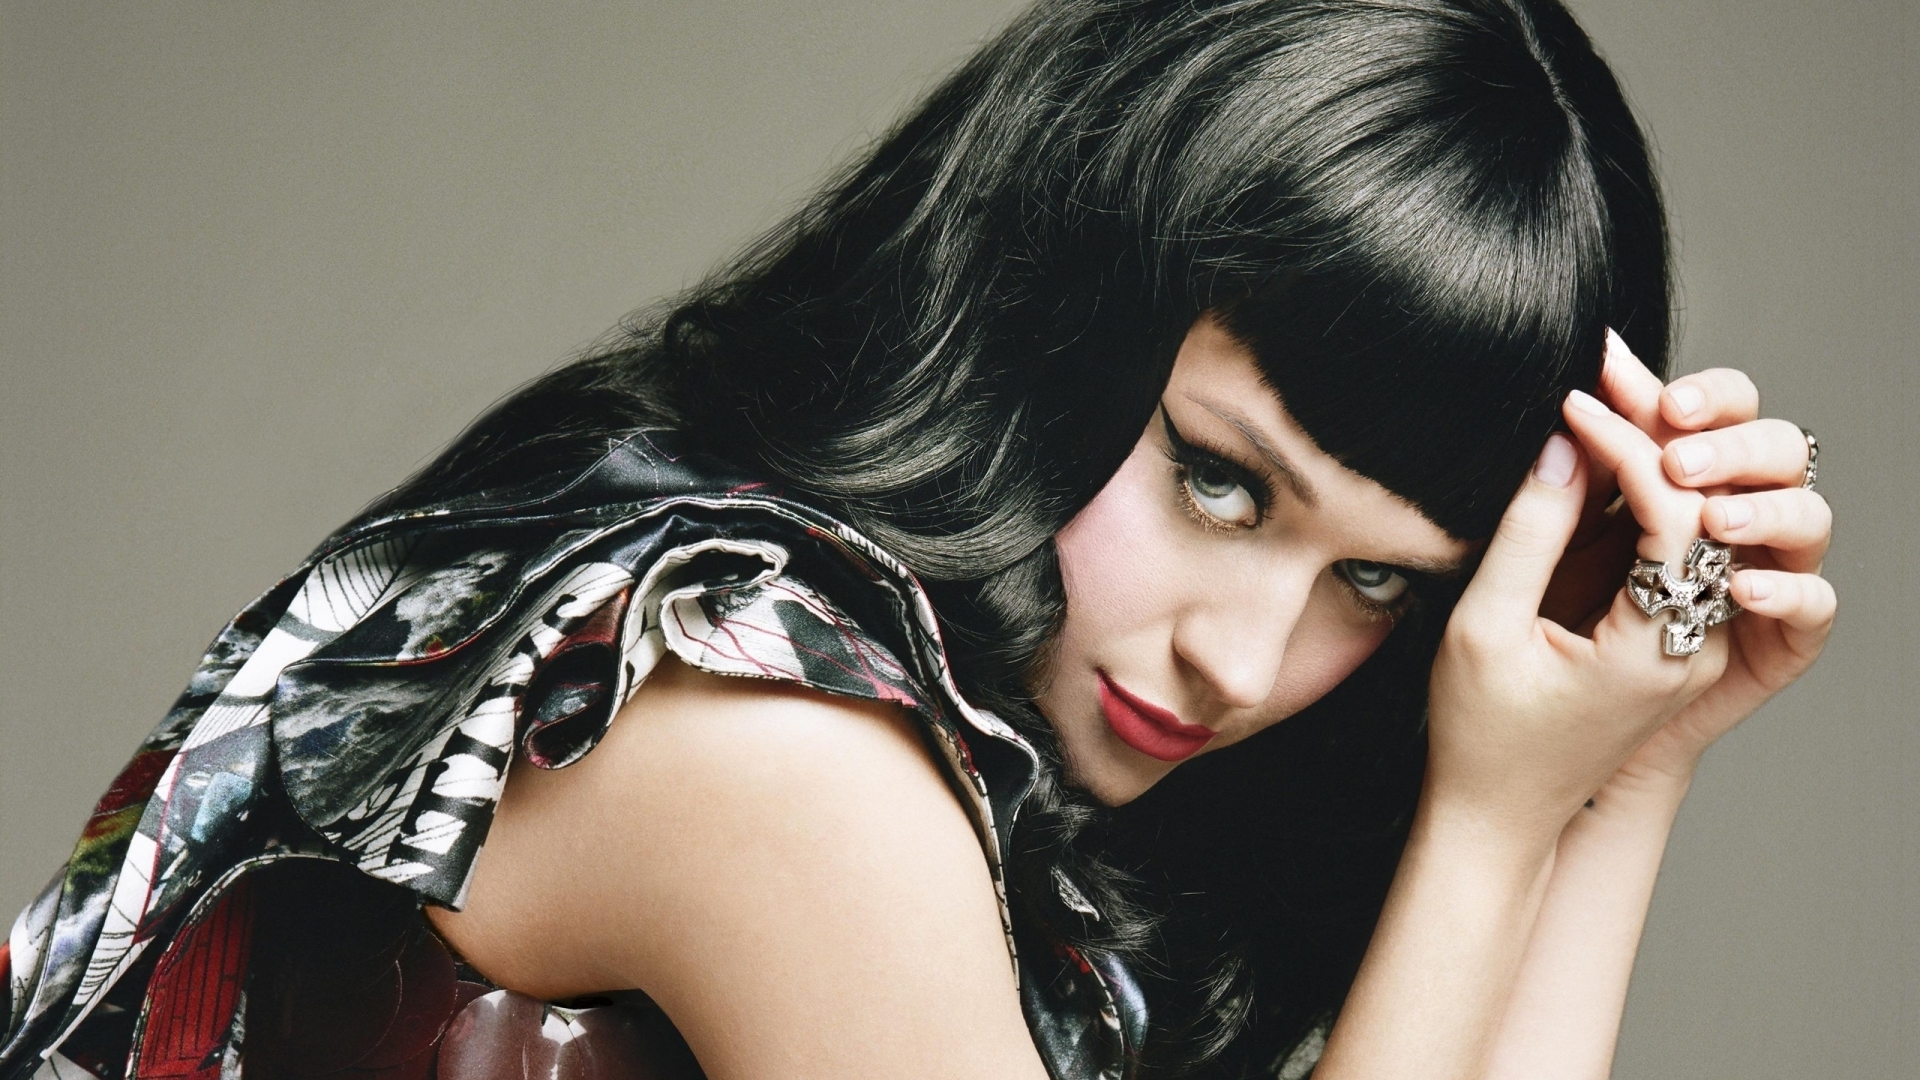 Katy Perry Glance for 1920 x 1080 HDTV 1080p resolution